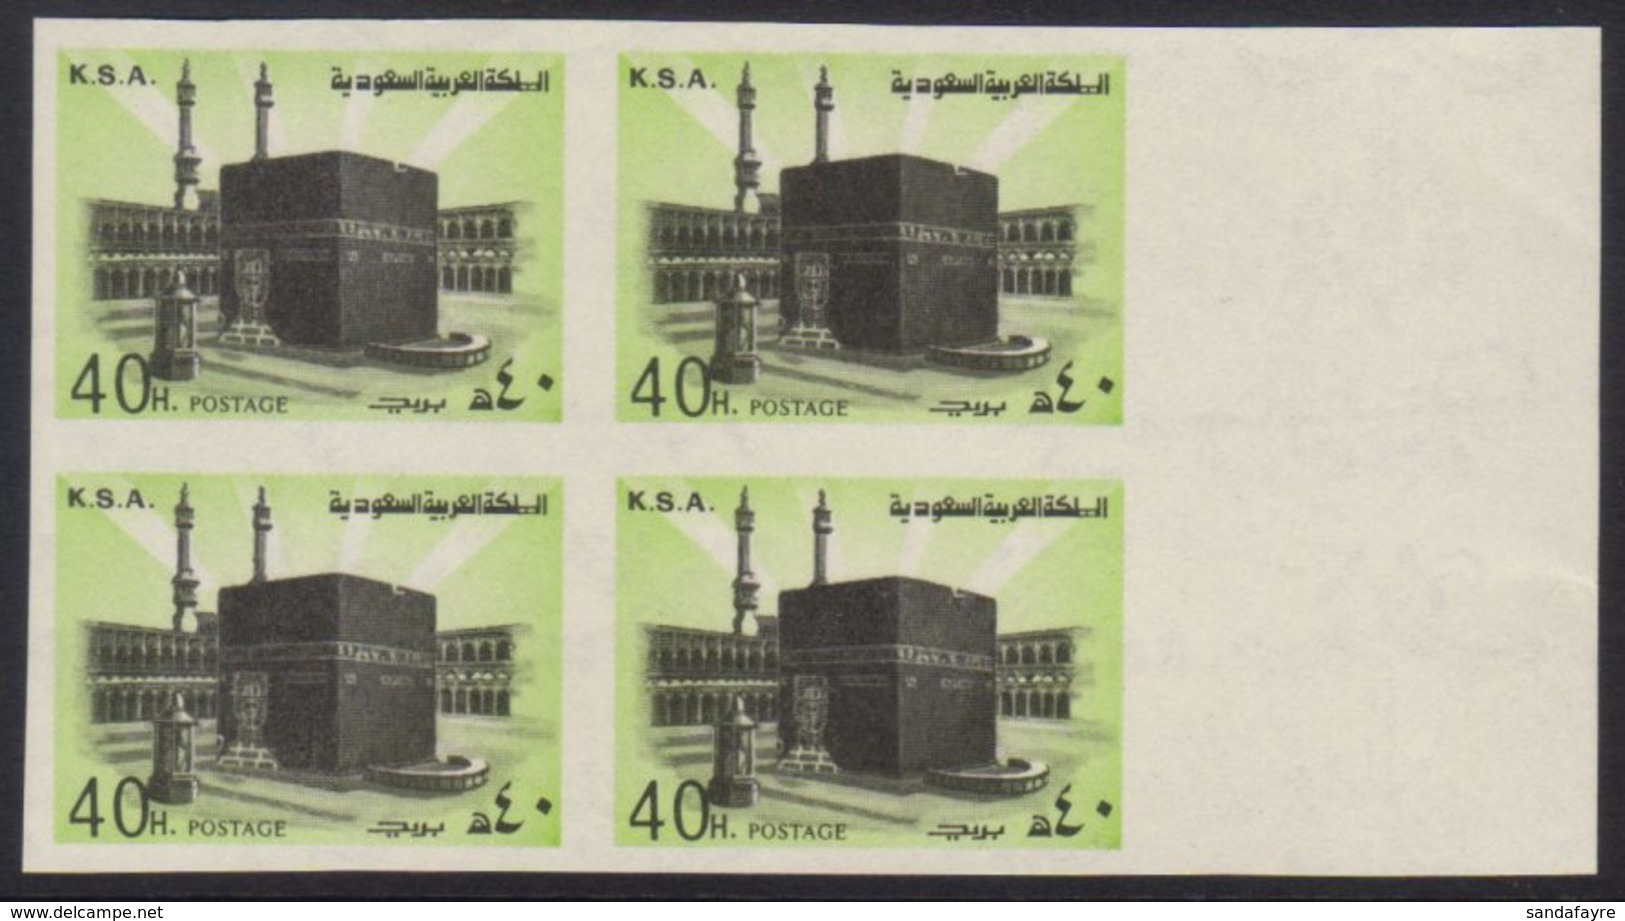 1976-81 IMPERF BLOCK OF FOUR 40h Black And Pale Yellow-green "Holy Kaaba, Mecca", Imperf, SG 1144a, A Superb Never Hinge - Arabie Saoudite